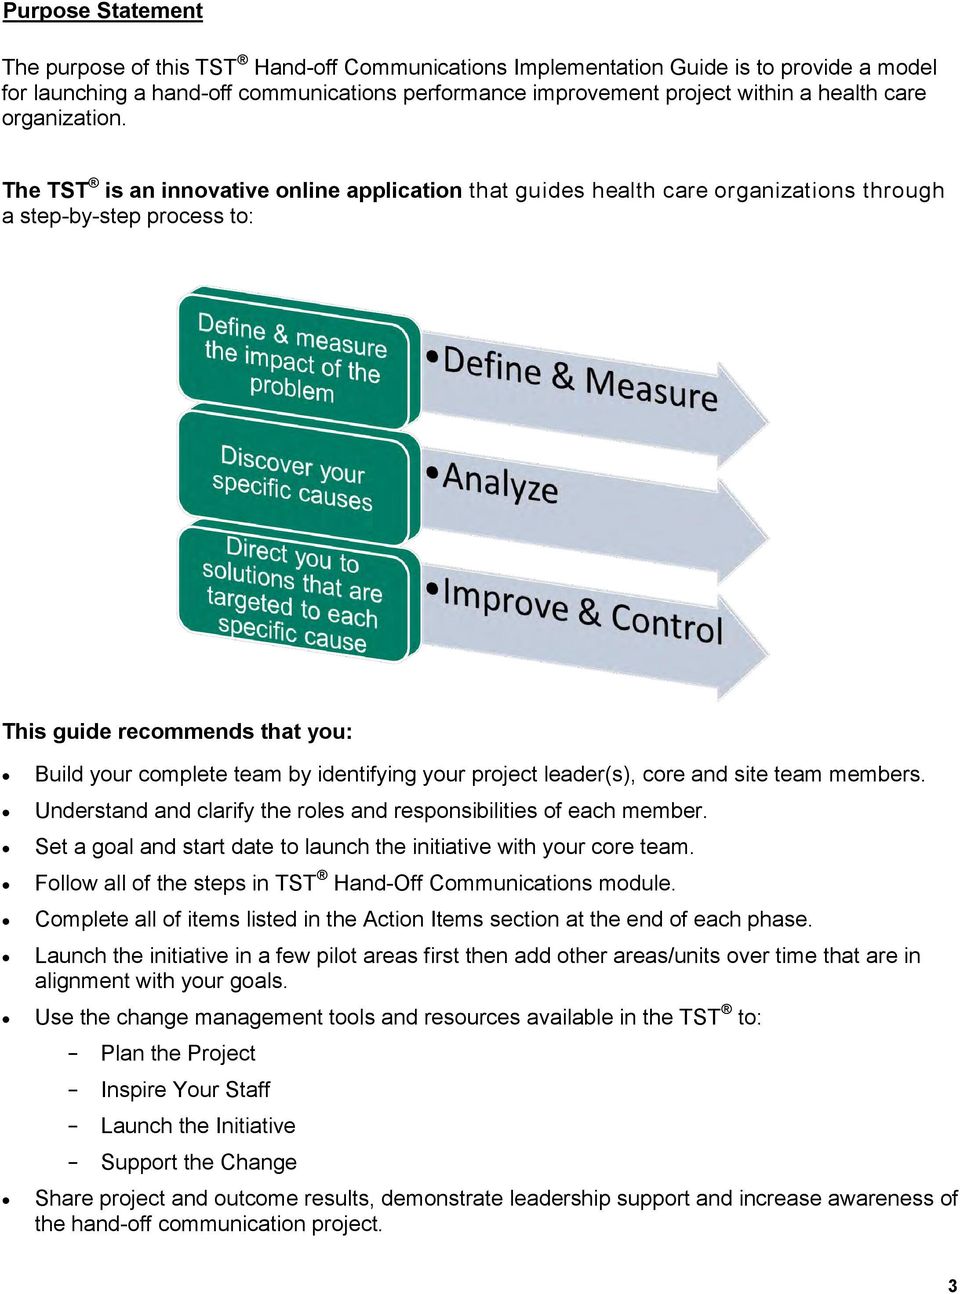 The TST is an innovative online application that guides health care organizations through a step-by-step process to: This guide recommends that you: Build your complete team by identifying your